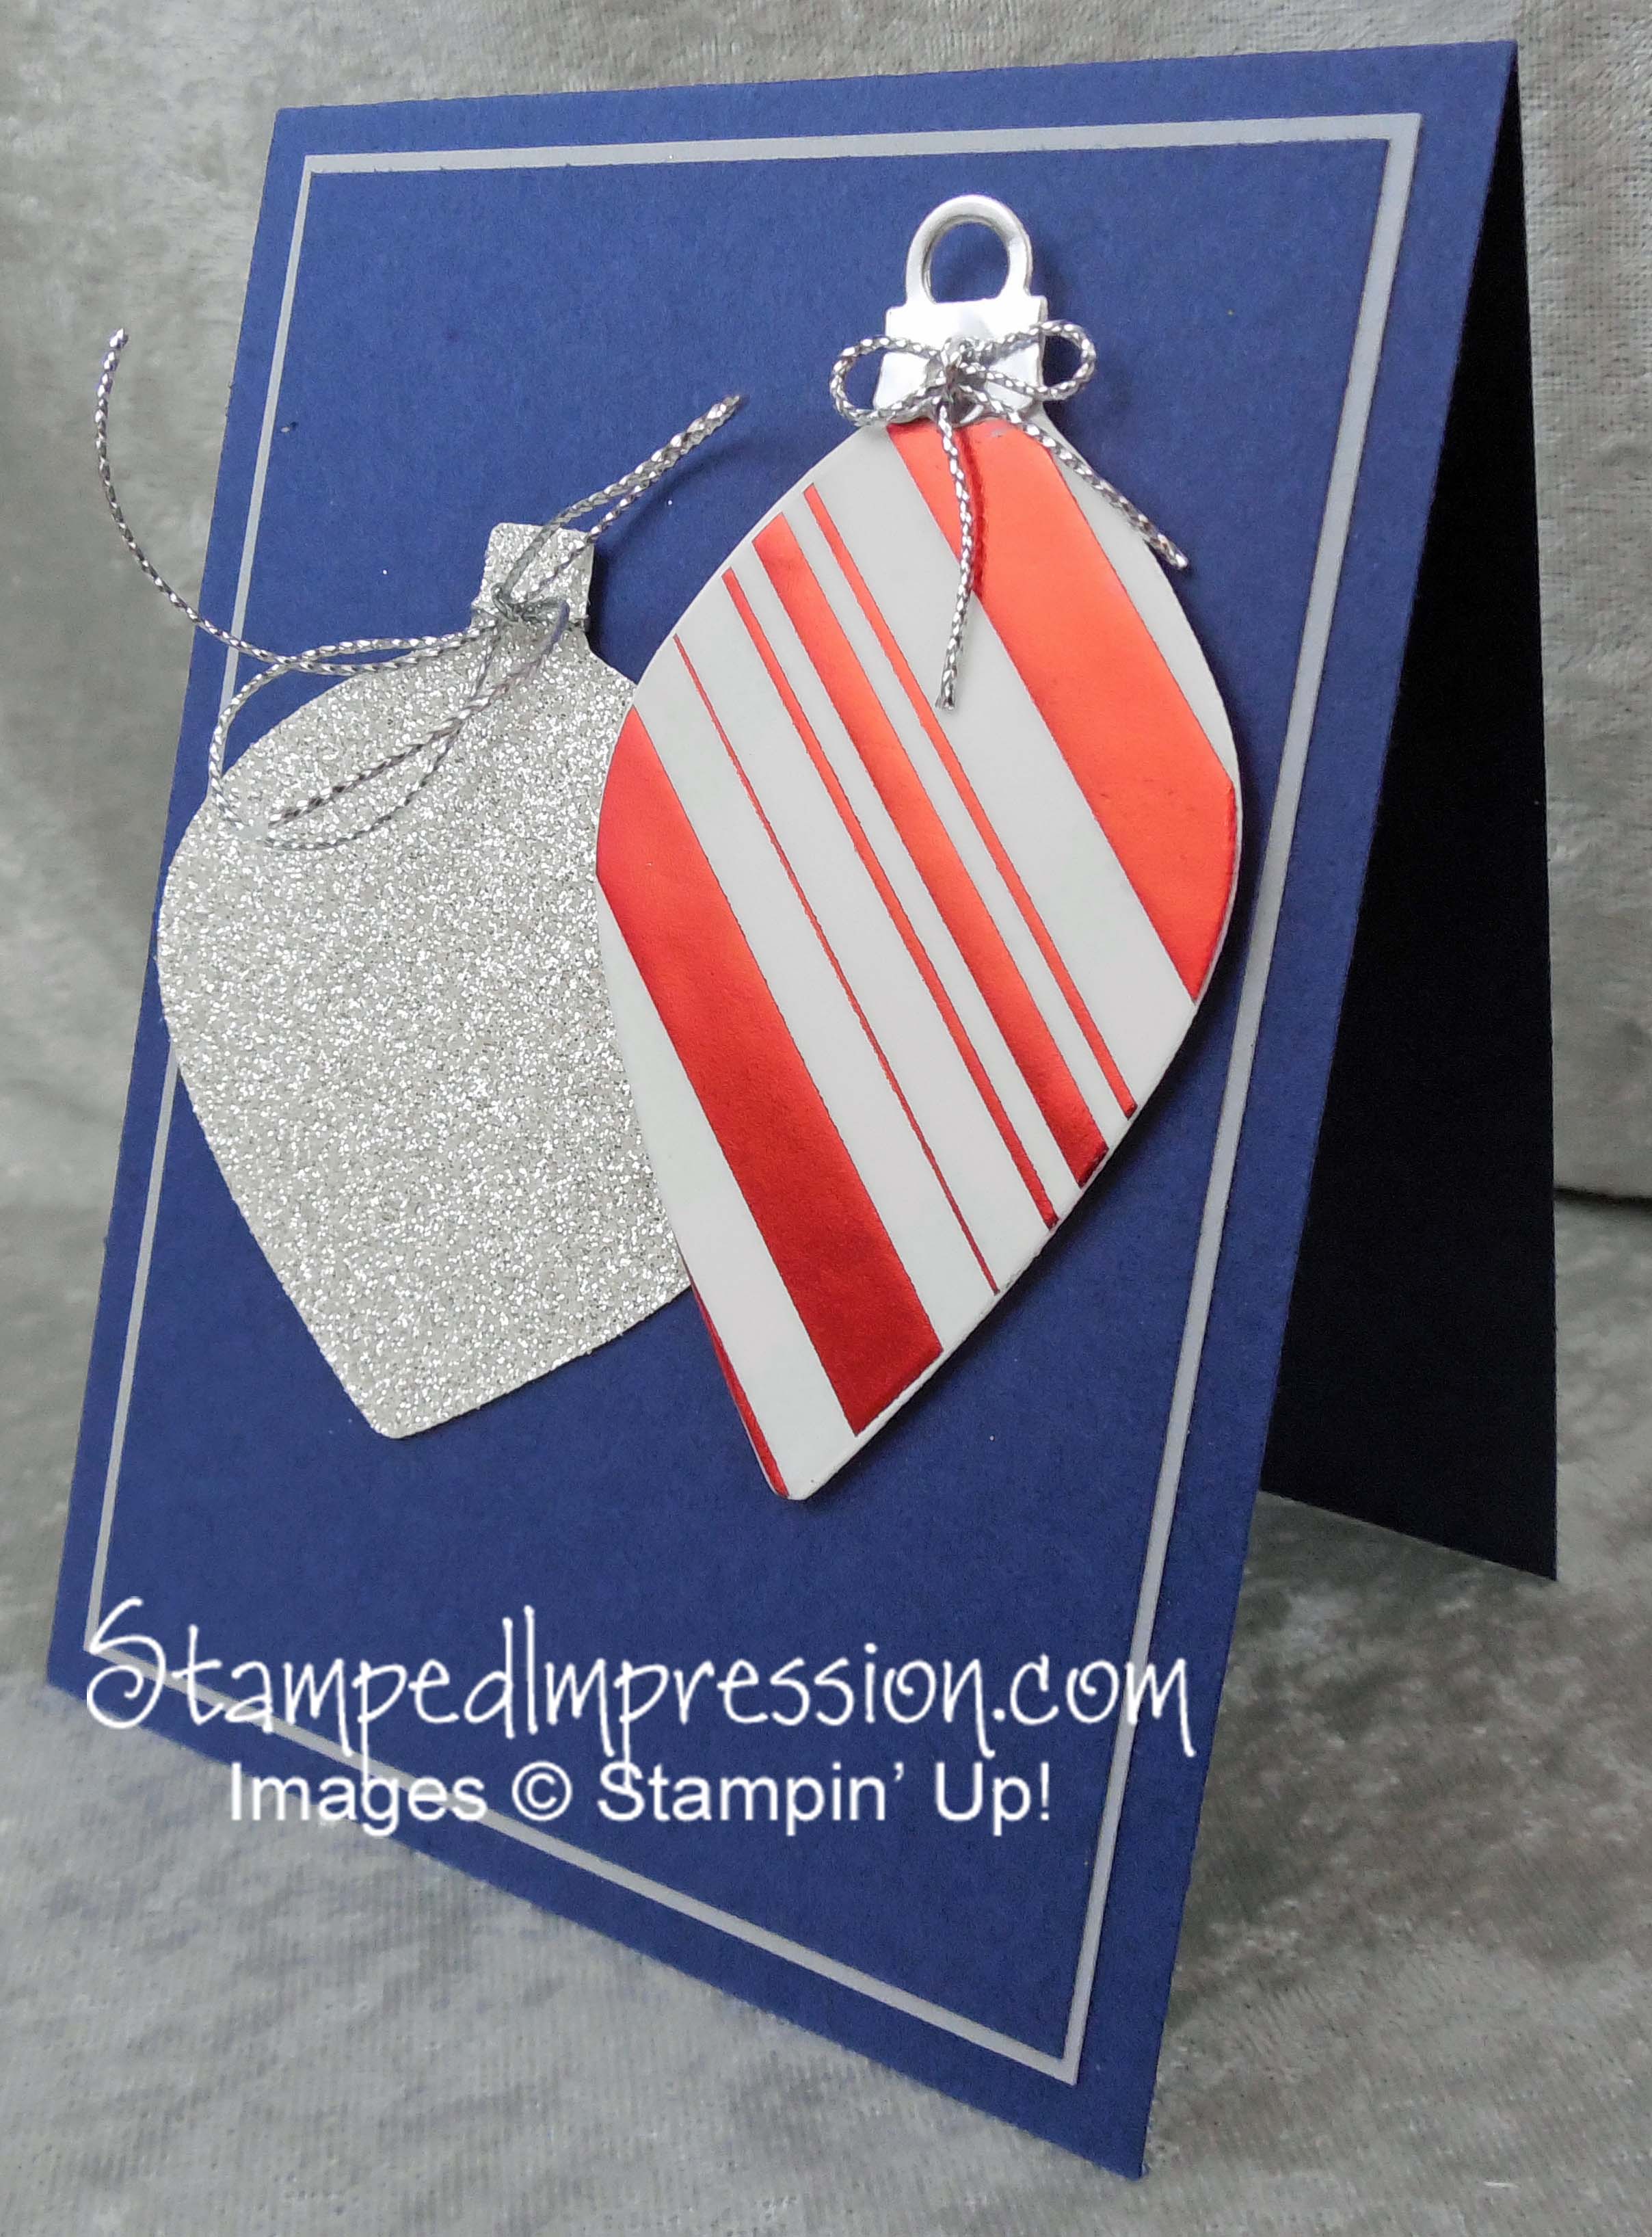 Ornament Card with Bling - http://stampedimpression.com